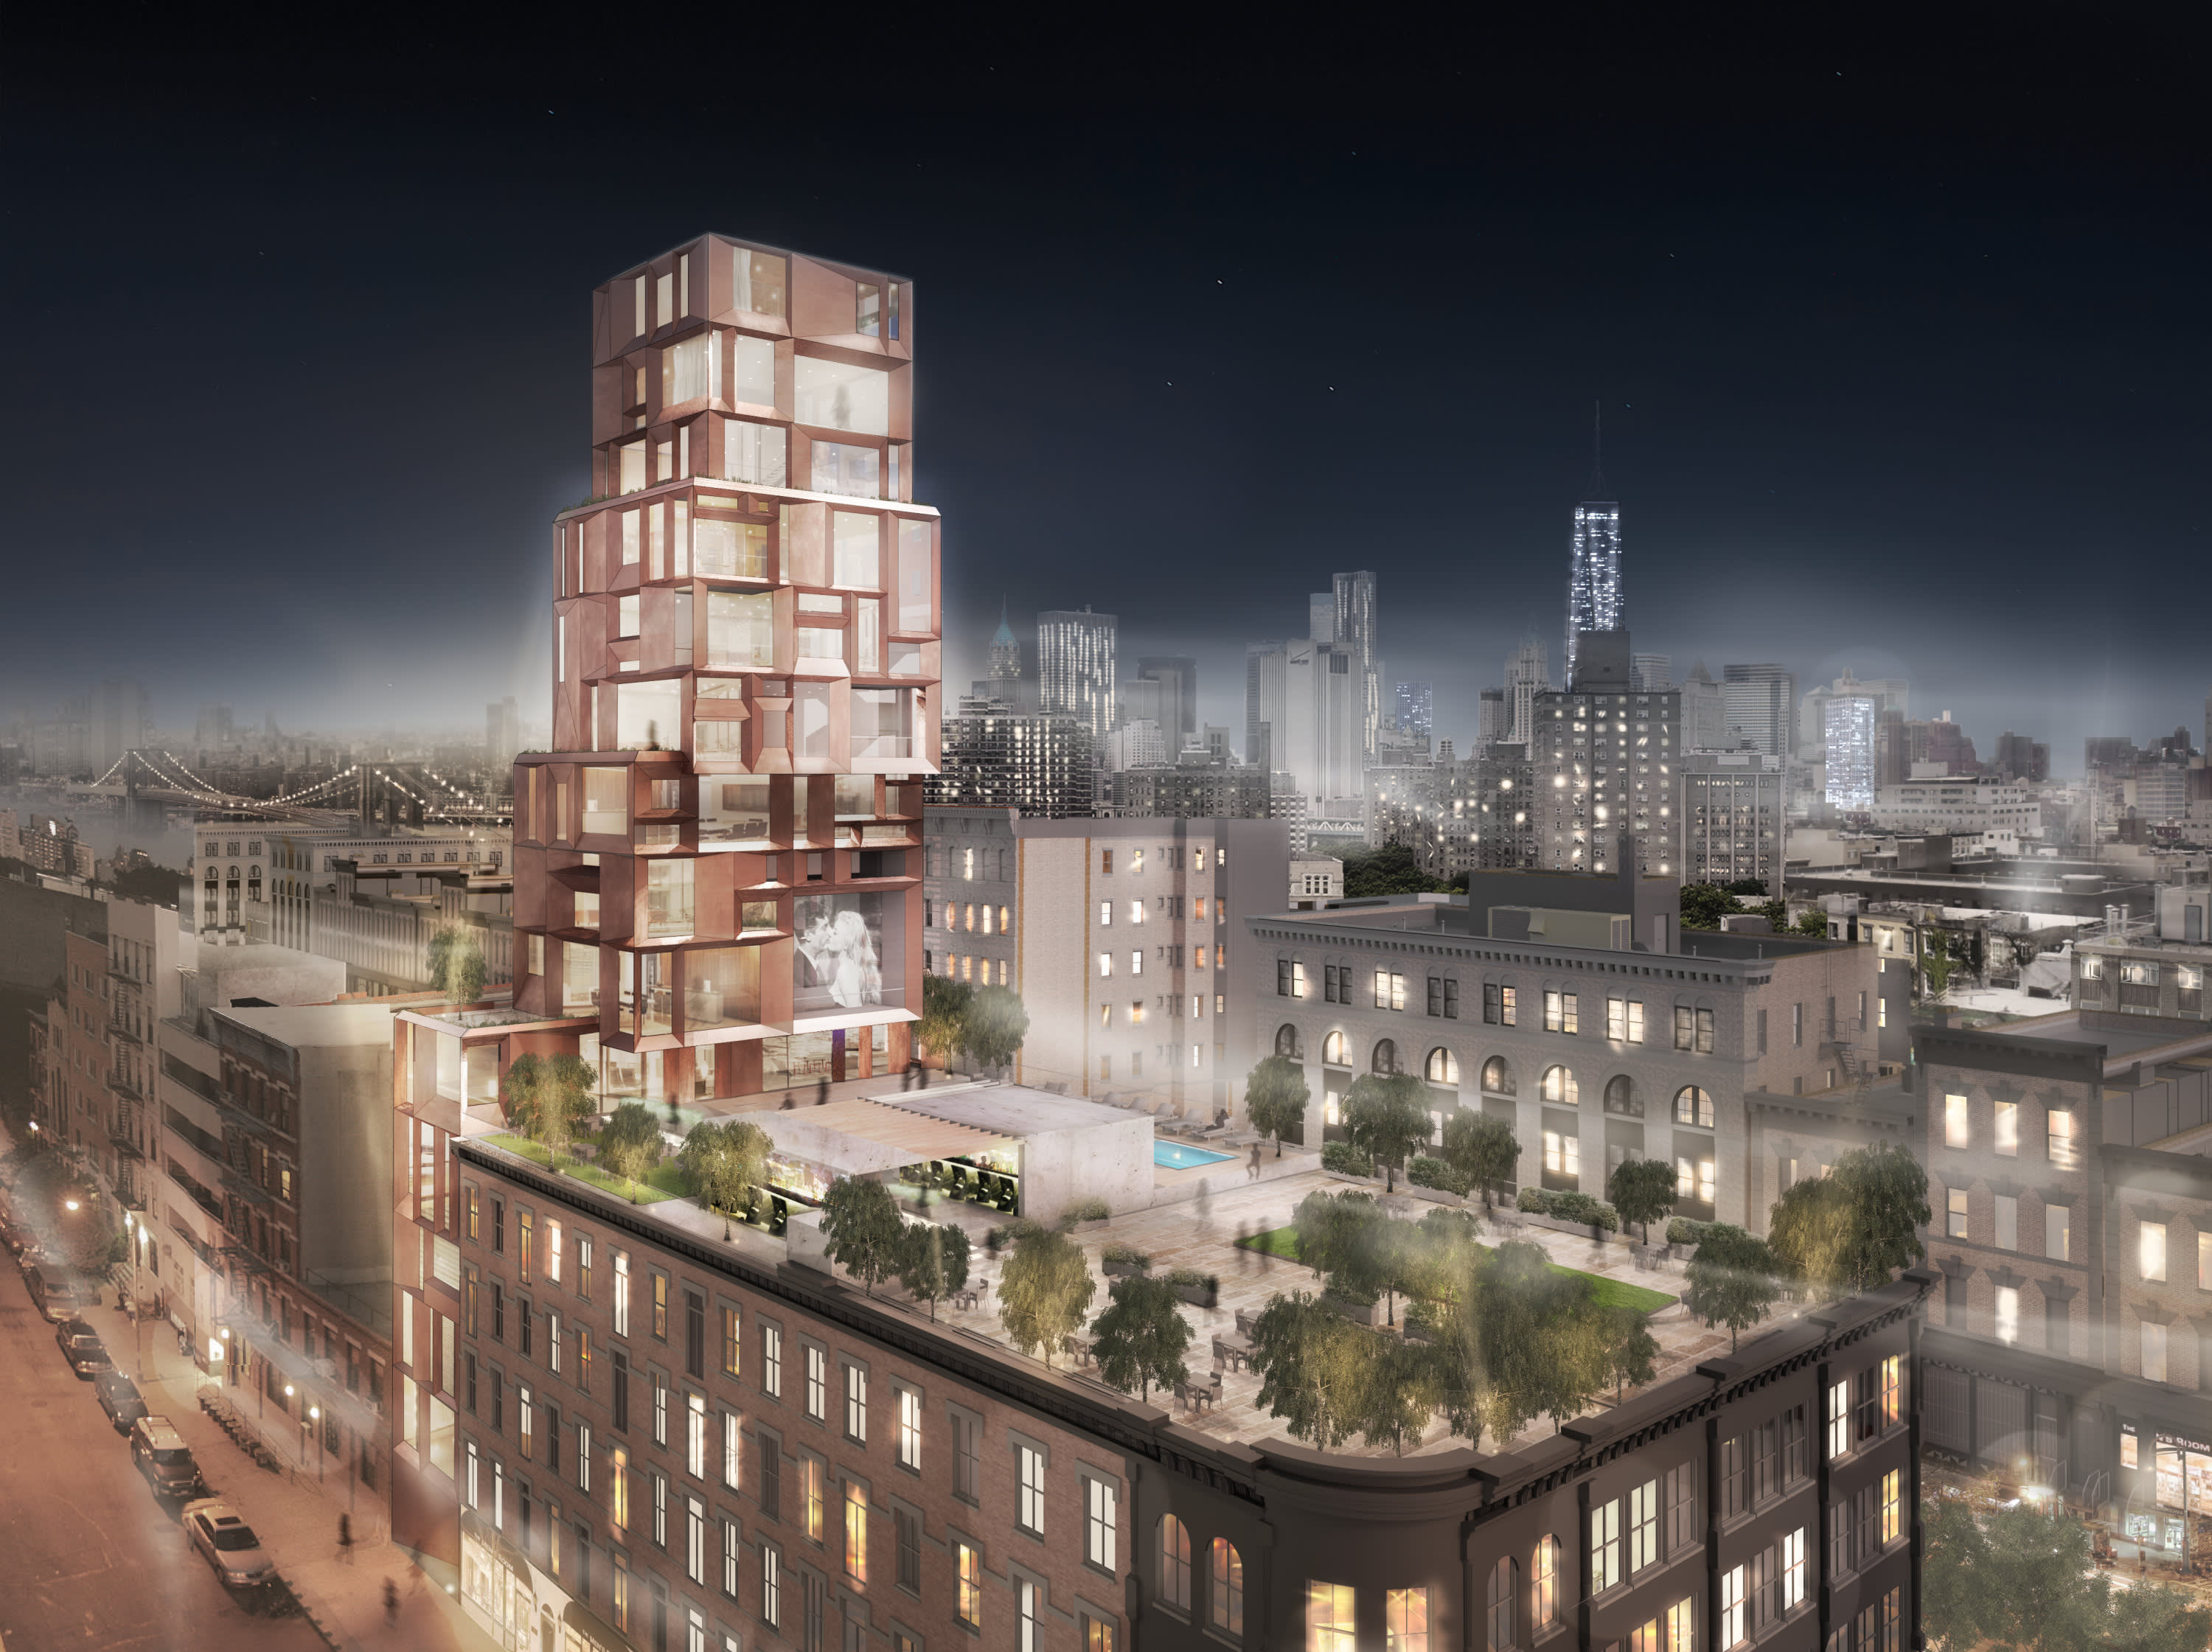 DXA Studio Designed This Lower East Side Tower With a Copper Facade That Changes Over Time